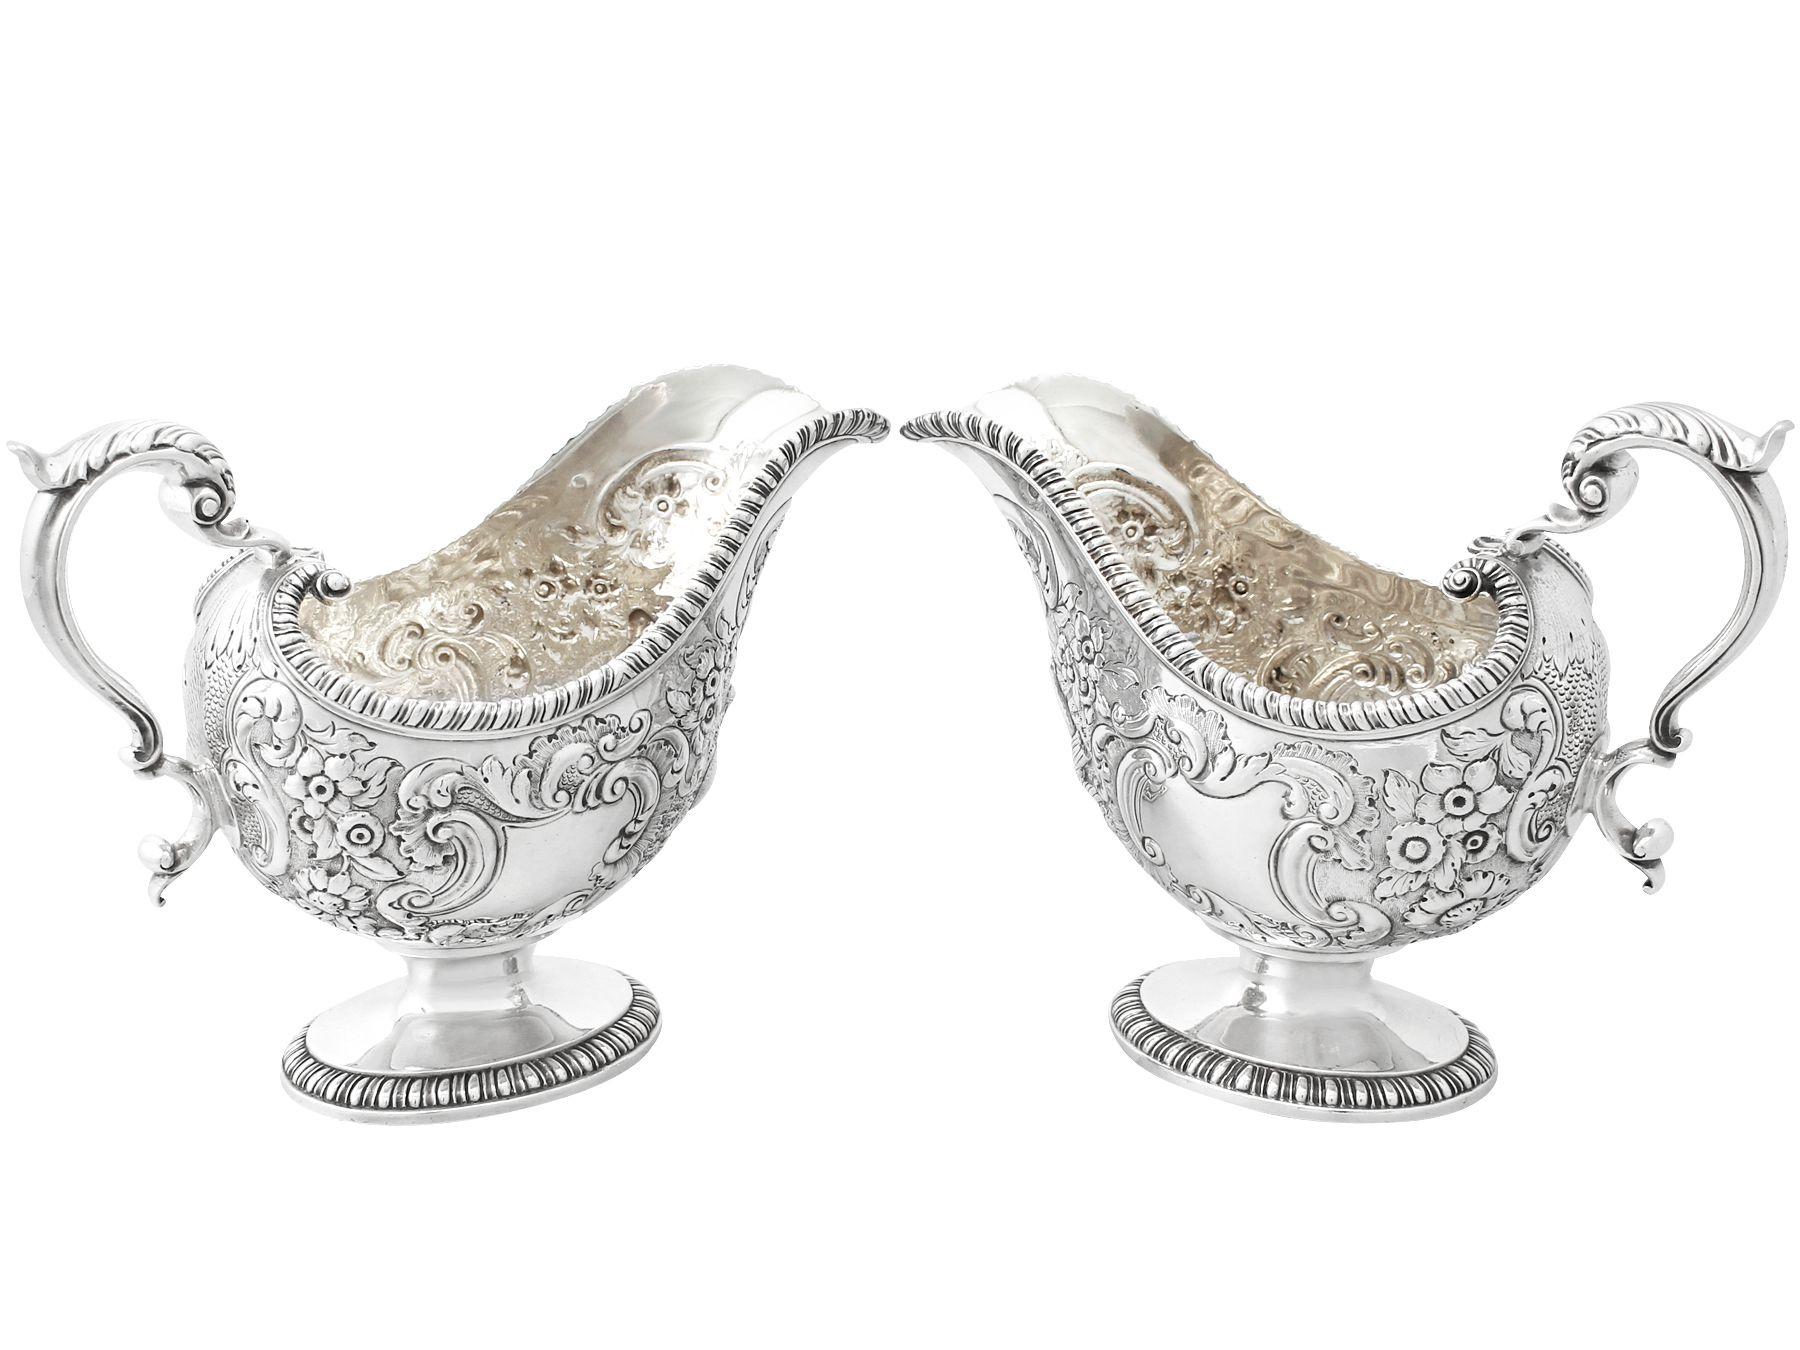 An exceptional, fine and impressive pair of antique Georgian English sterling silver sauceboats; an addition to our dining silverware collection

These exceptional antique George III sterling silver sauceboats have an oval rounded form in the